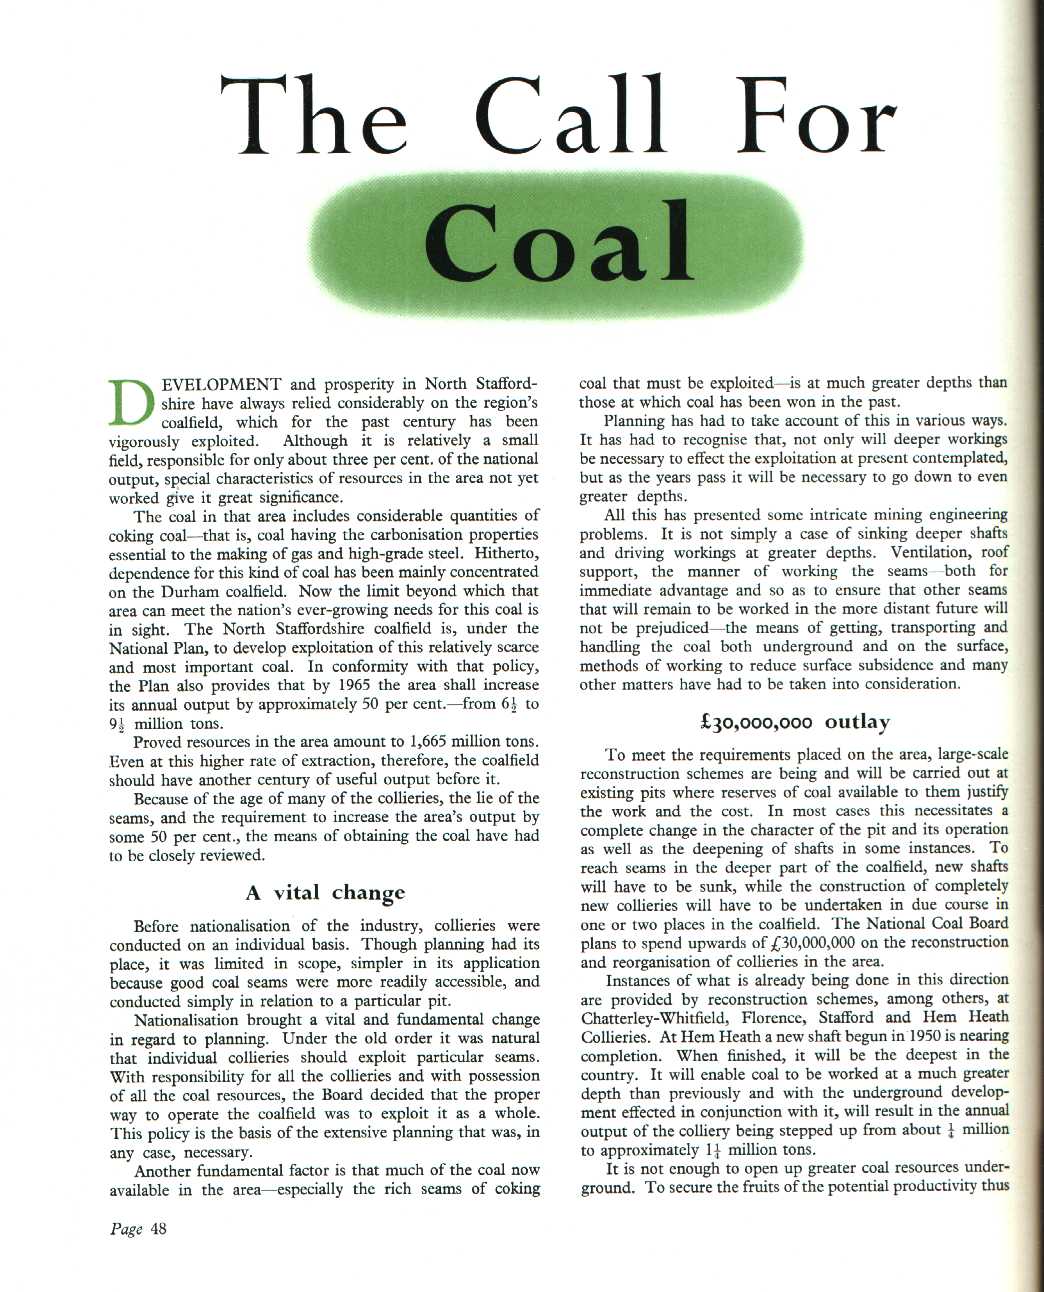 The call for coal